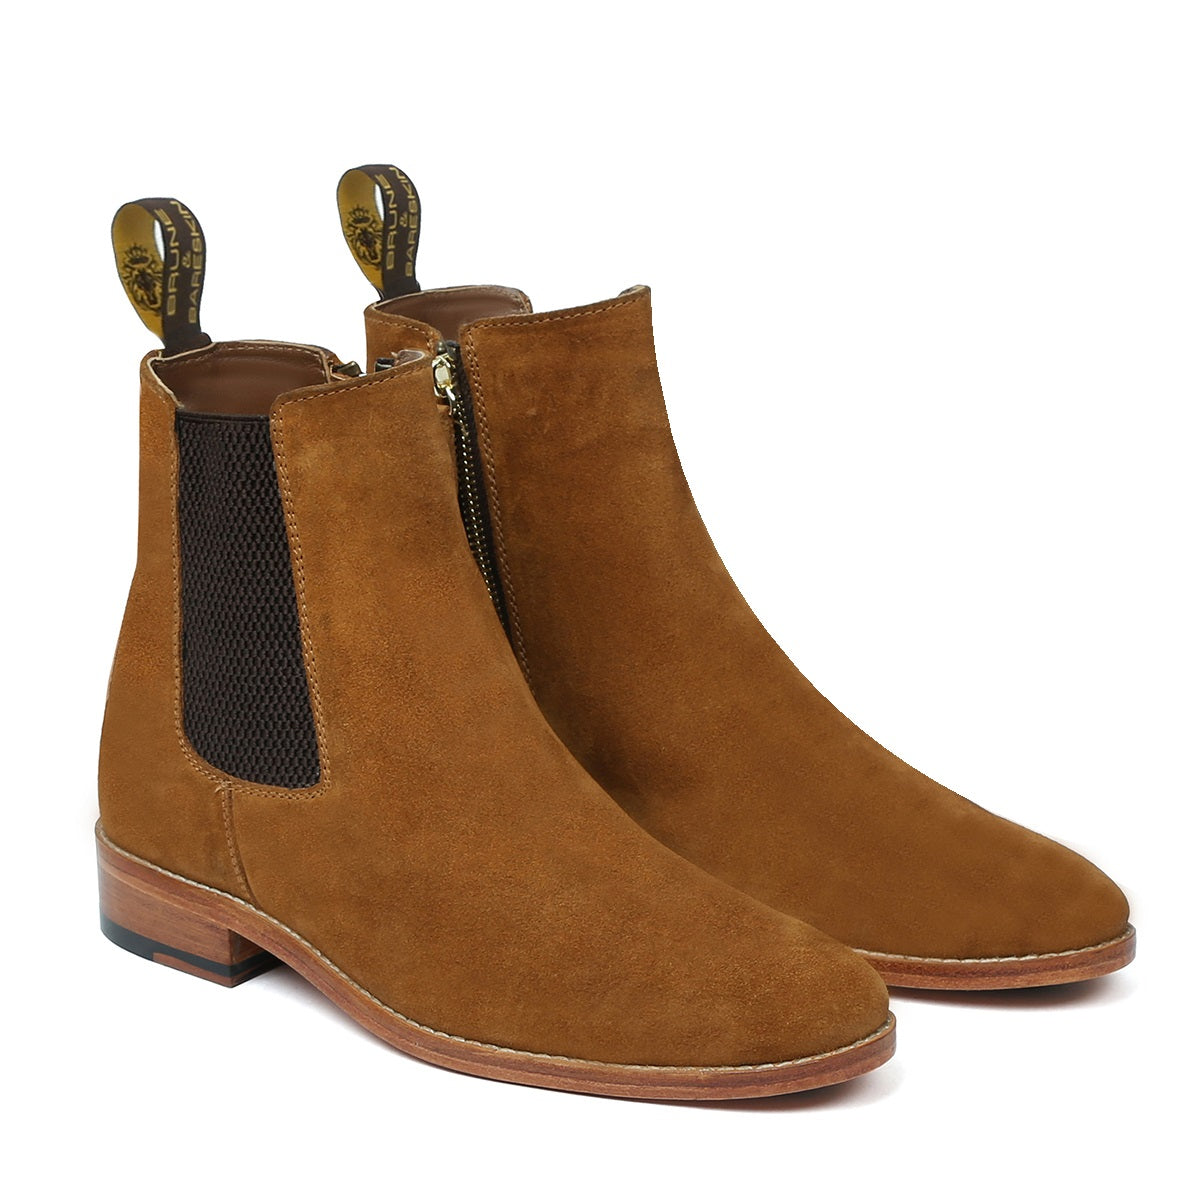 Brown Suede Leather Hand Made Chelsea Boots For Men By Brune & Bareskin